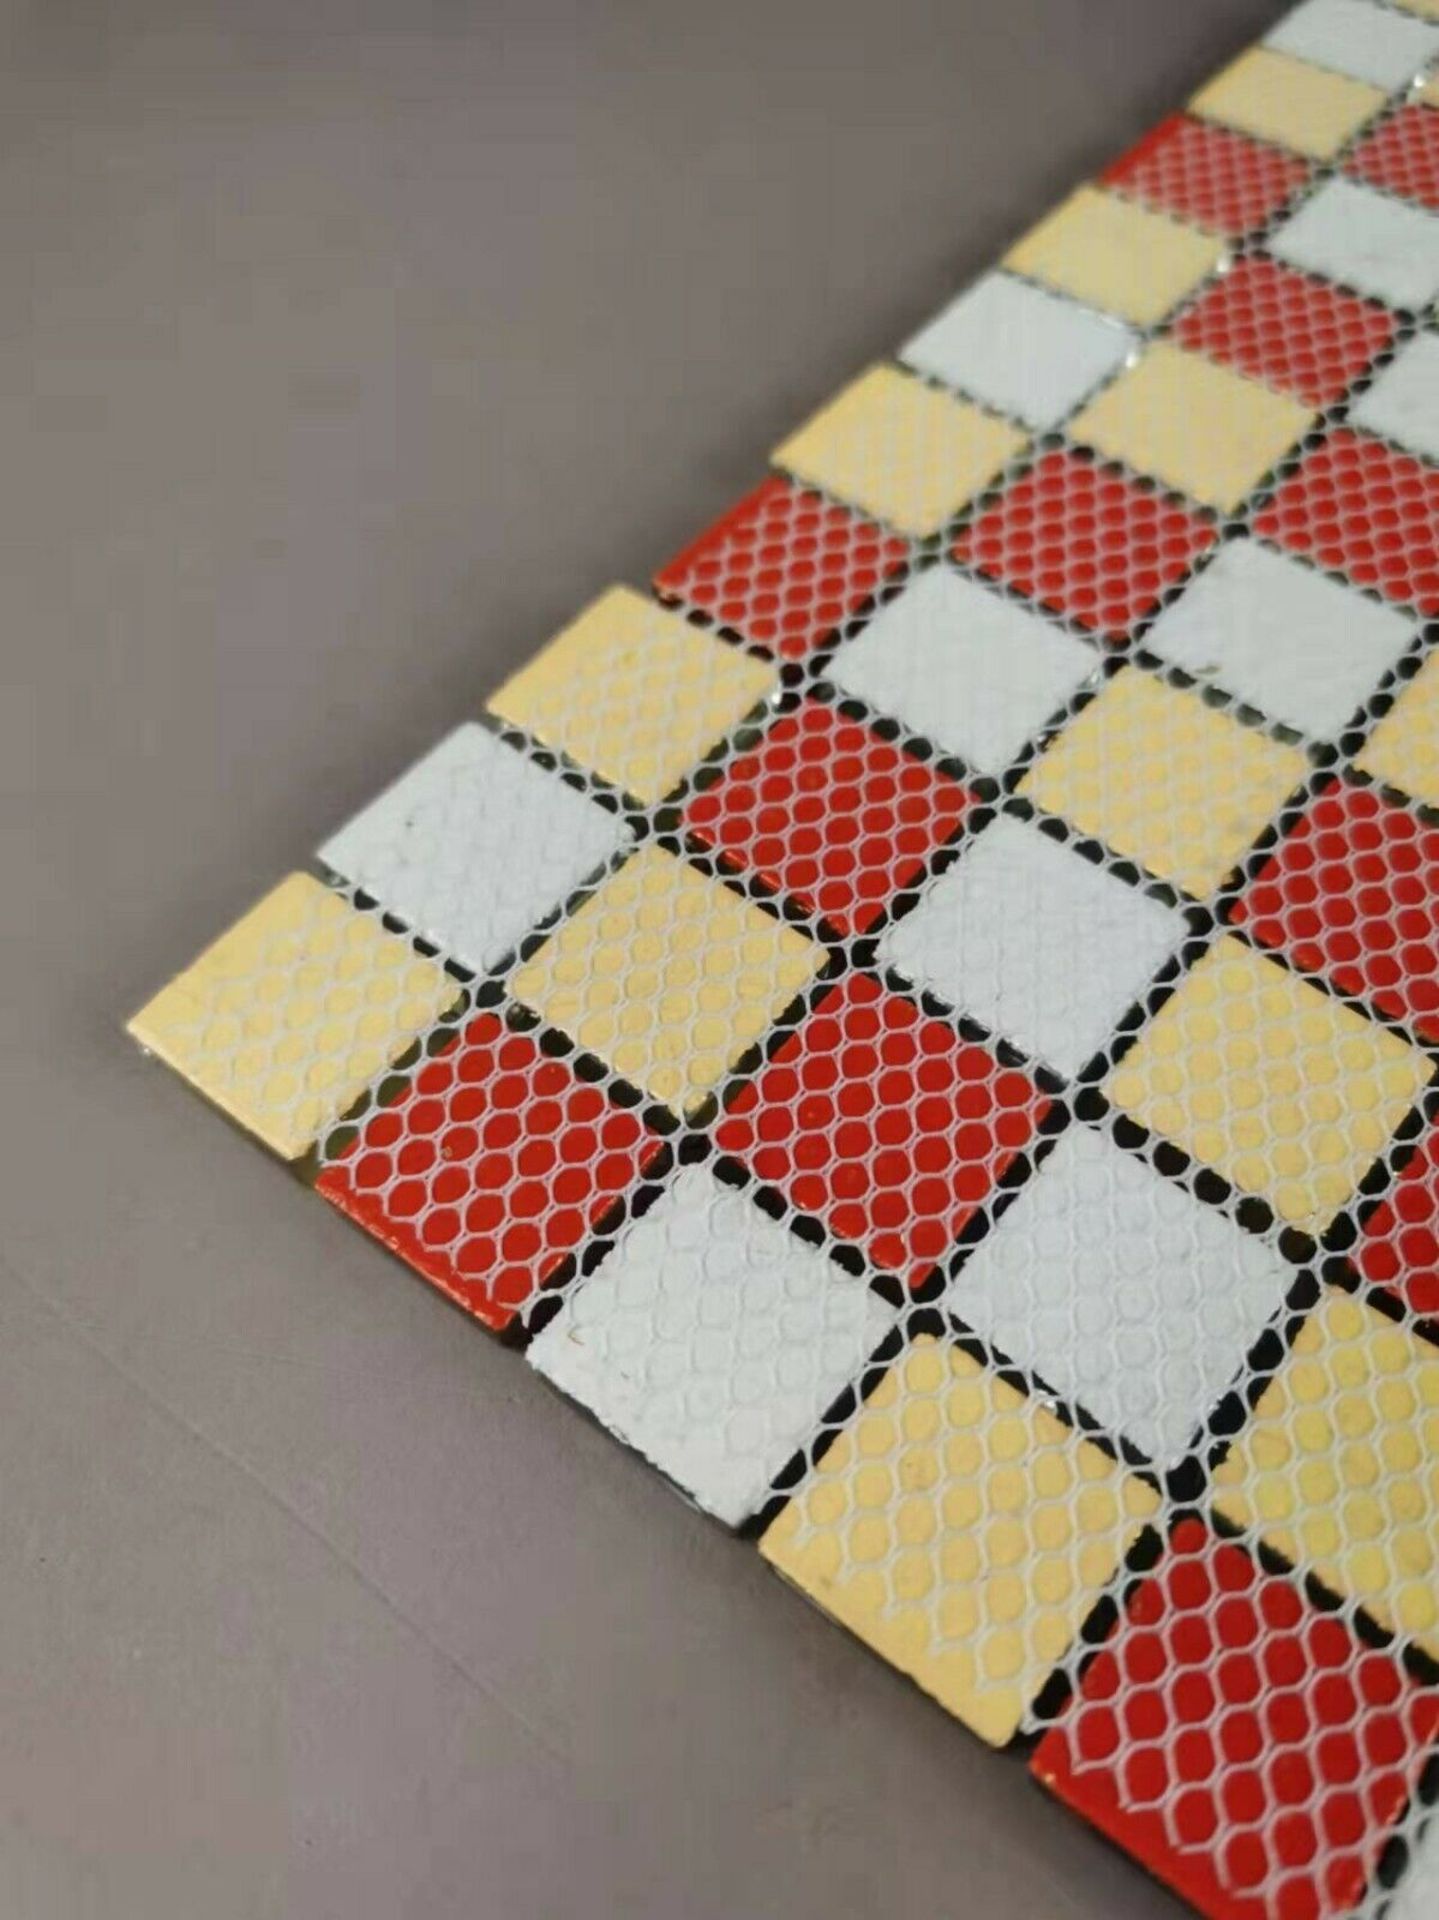 Stock Clearance High Quality Glass/Stainless Steel Mosaic Tiles - 11 Sheets - One Square Metre - Image 4 of 4